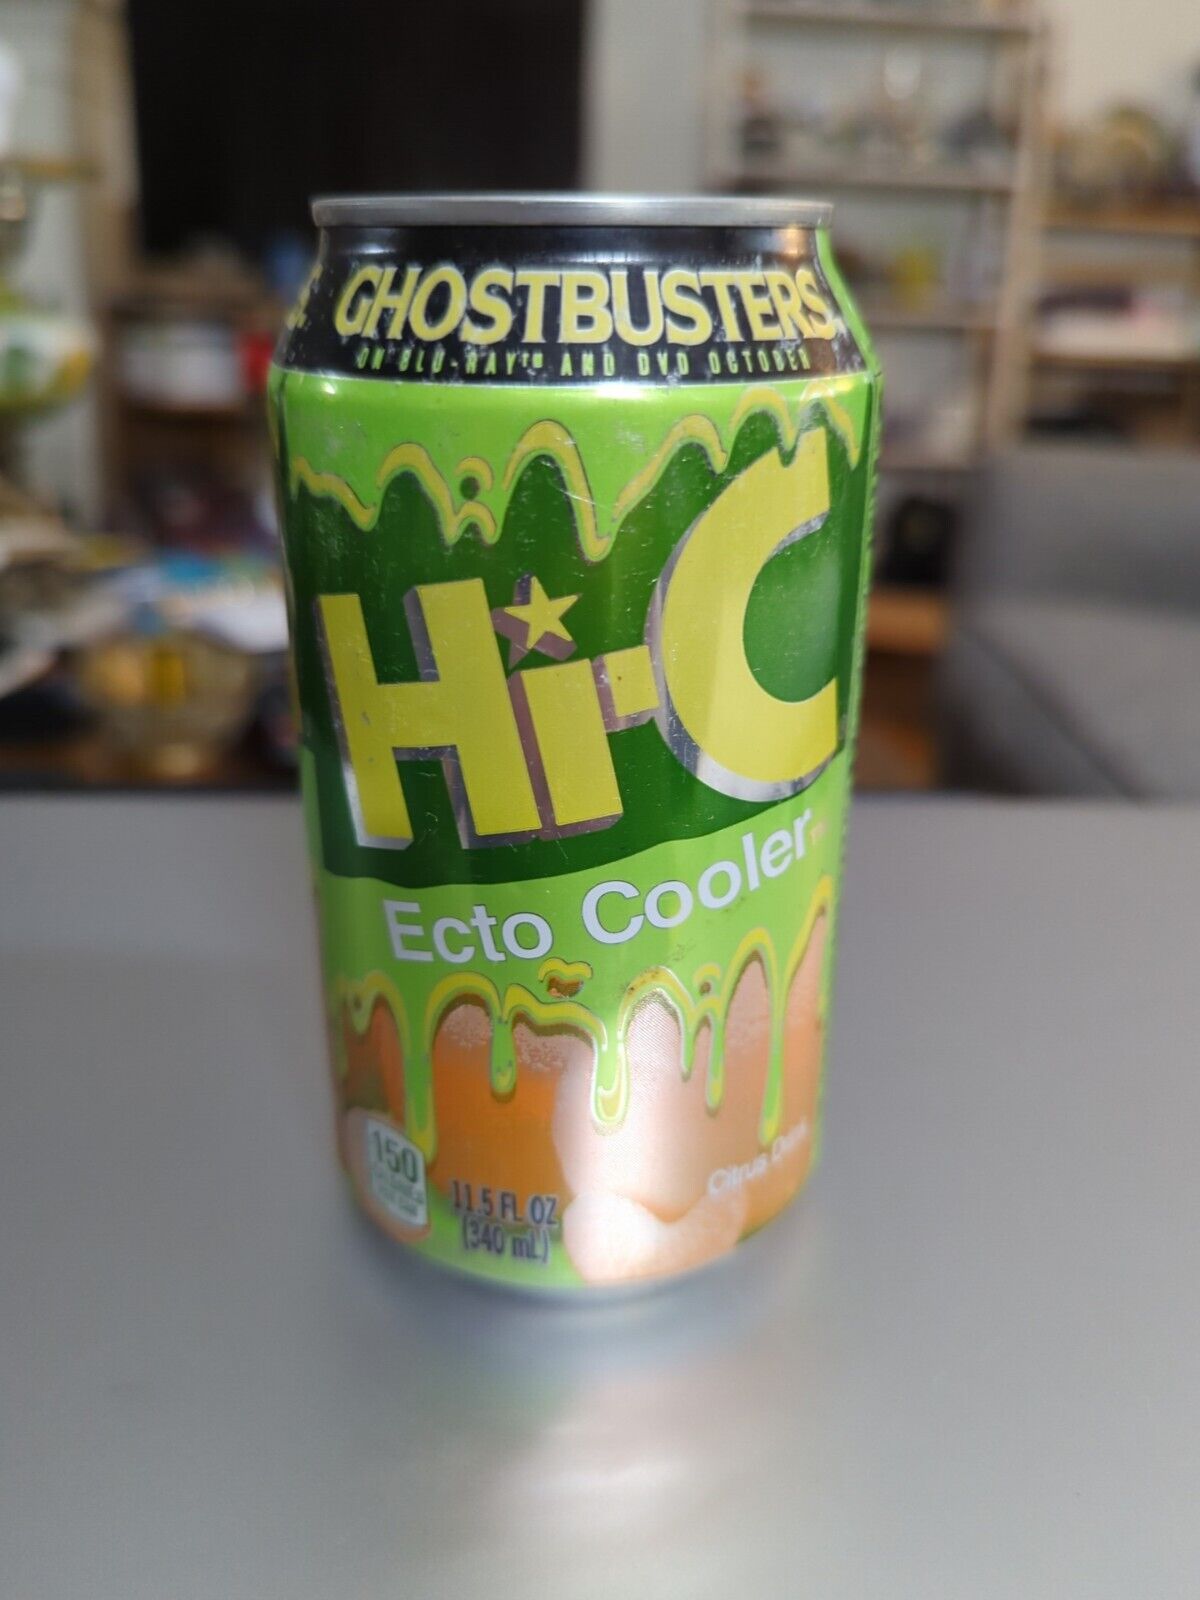 2016 Hi-C Ecto Cooler Ghostbusters Sealed Unopened Single Collectible Can Expire